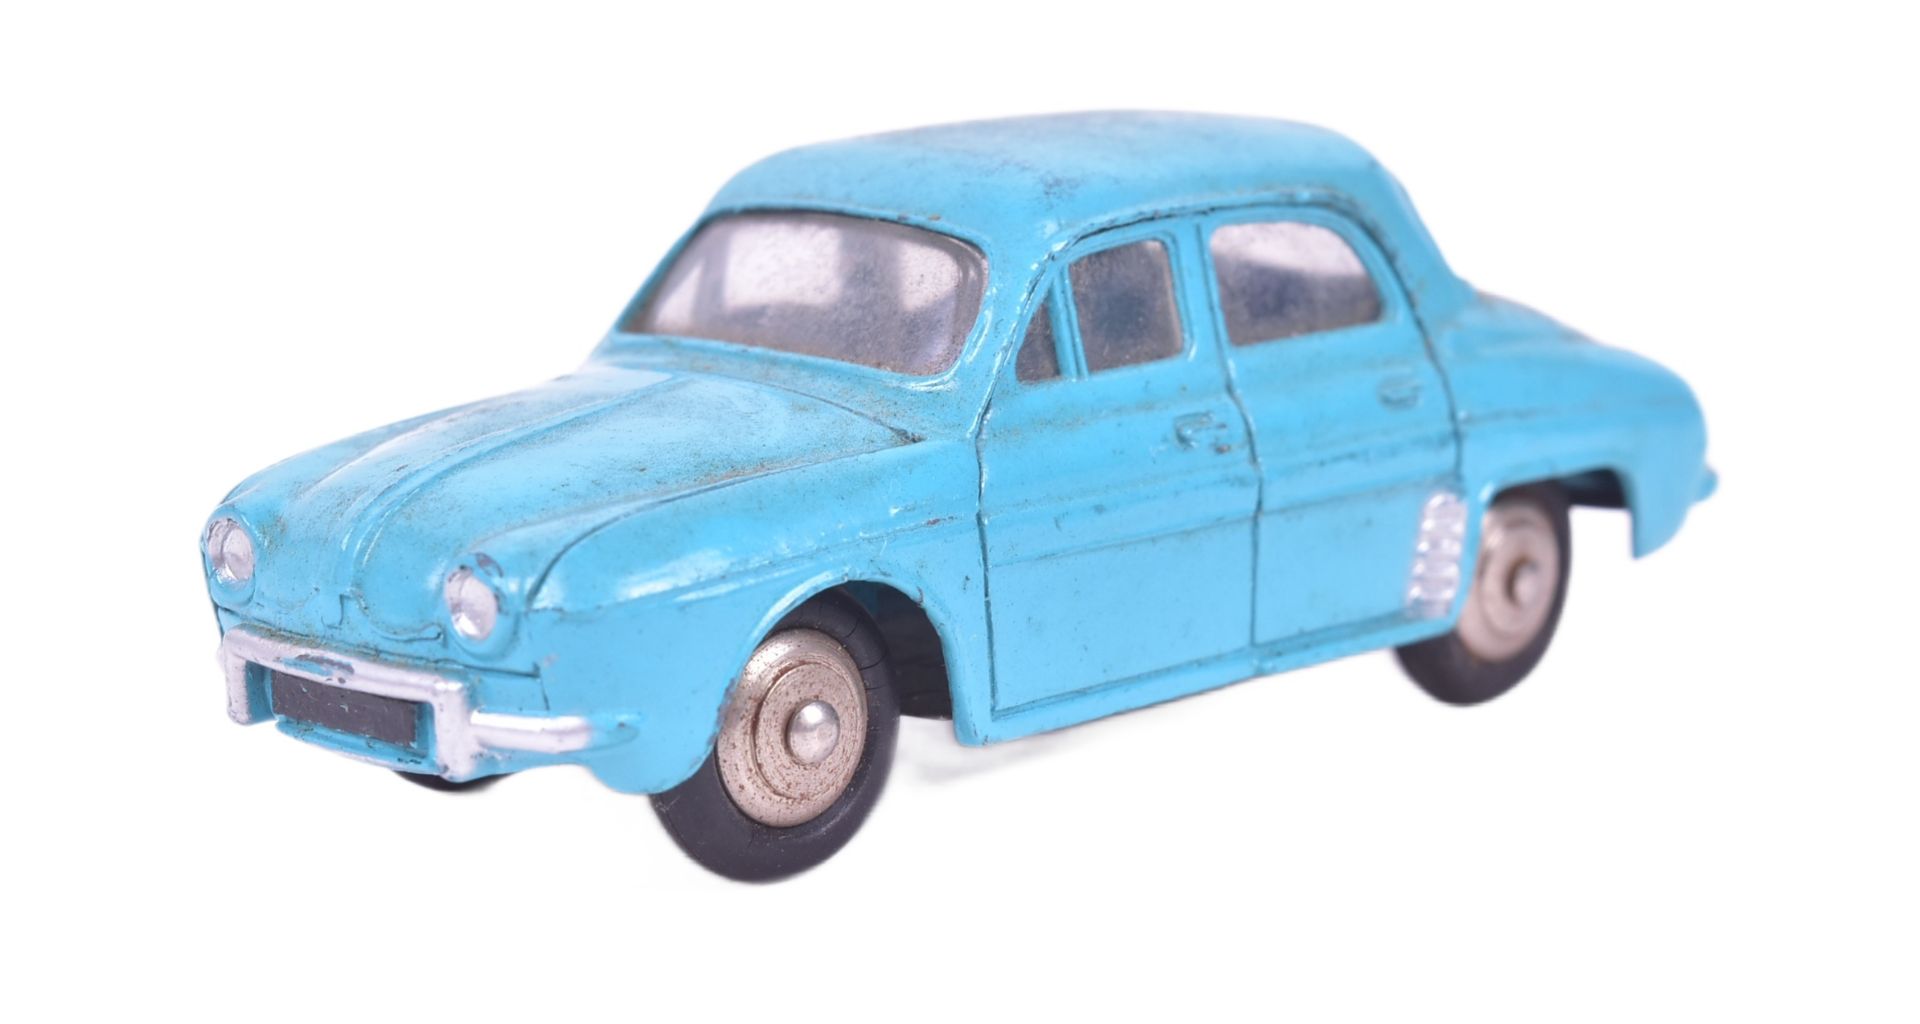 DIECAST - FRENCH DINKY TOYS - RENAULT DAUPHINE